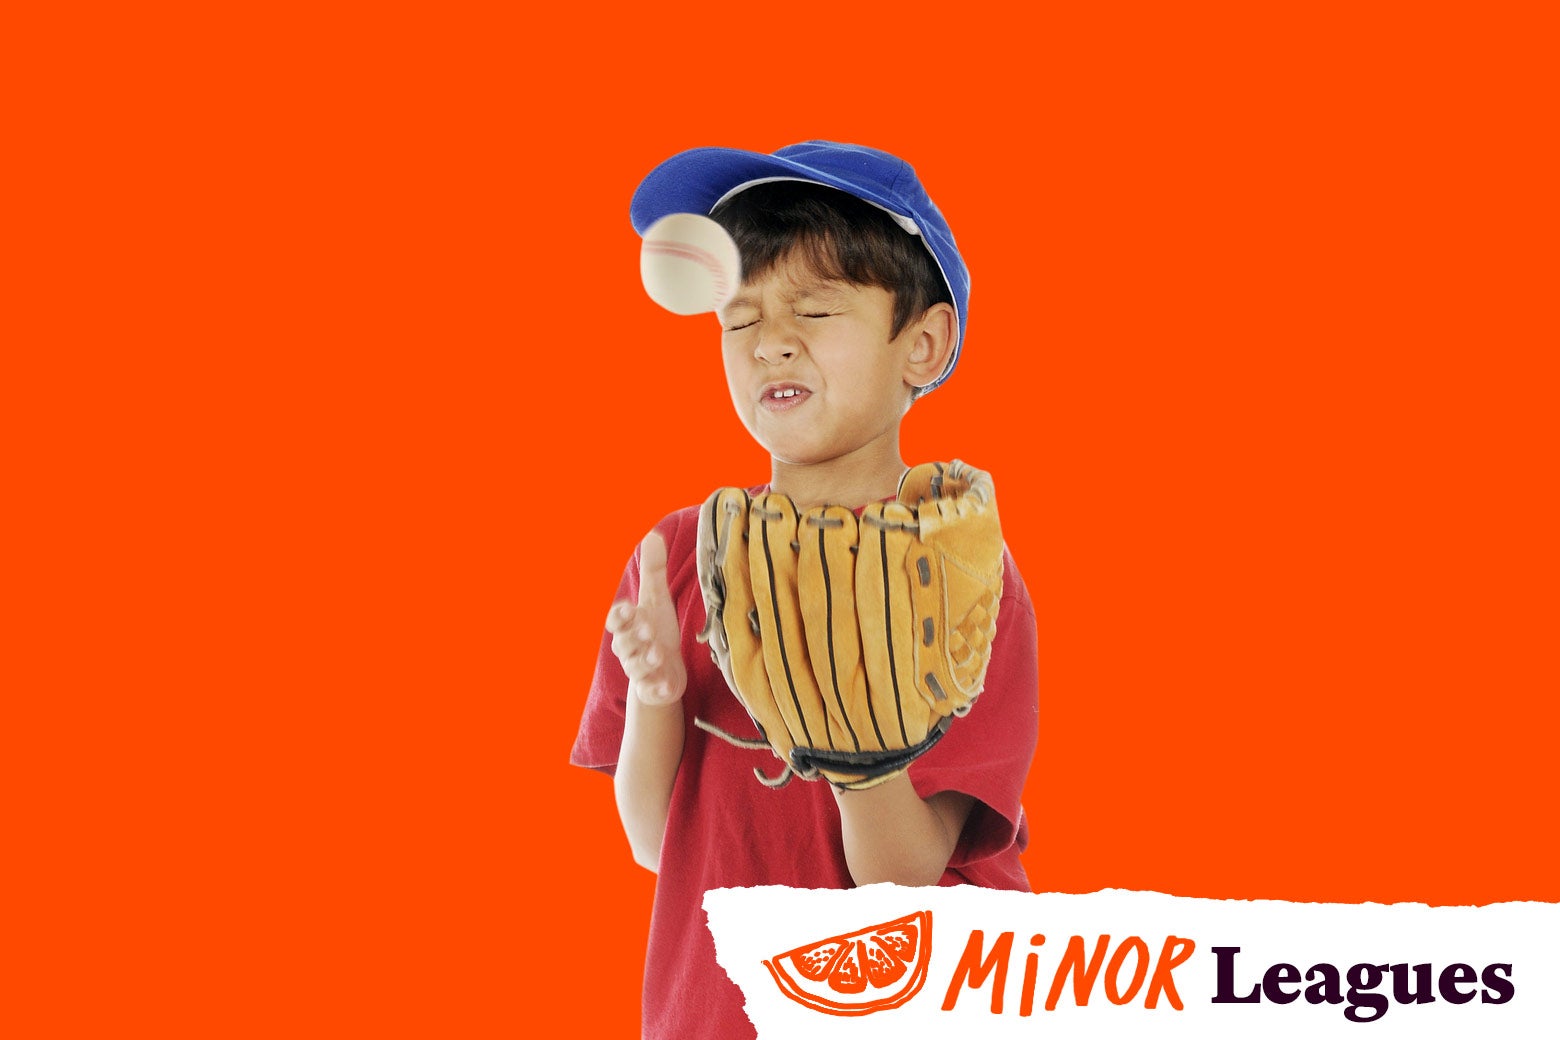 A child takes a baseball to the face.